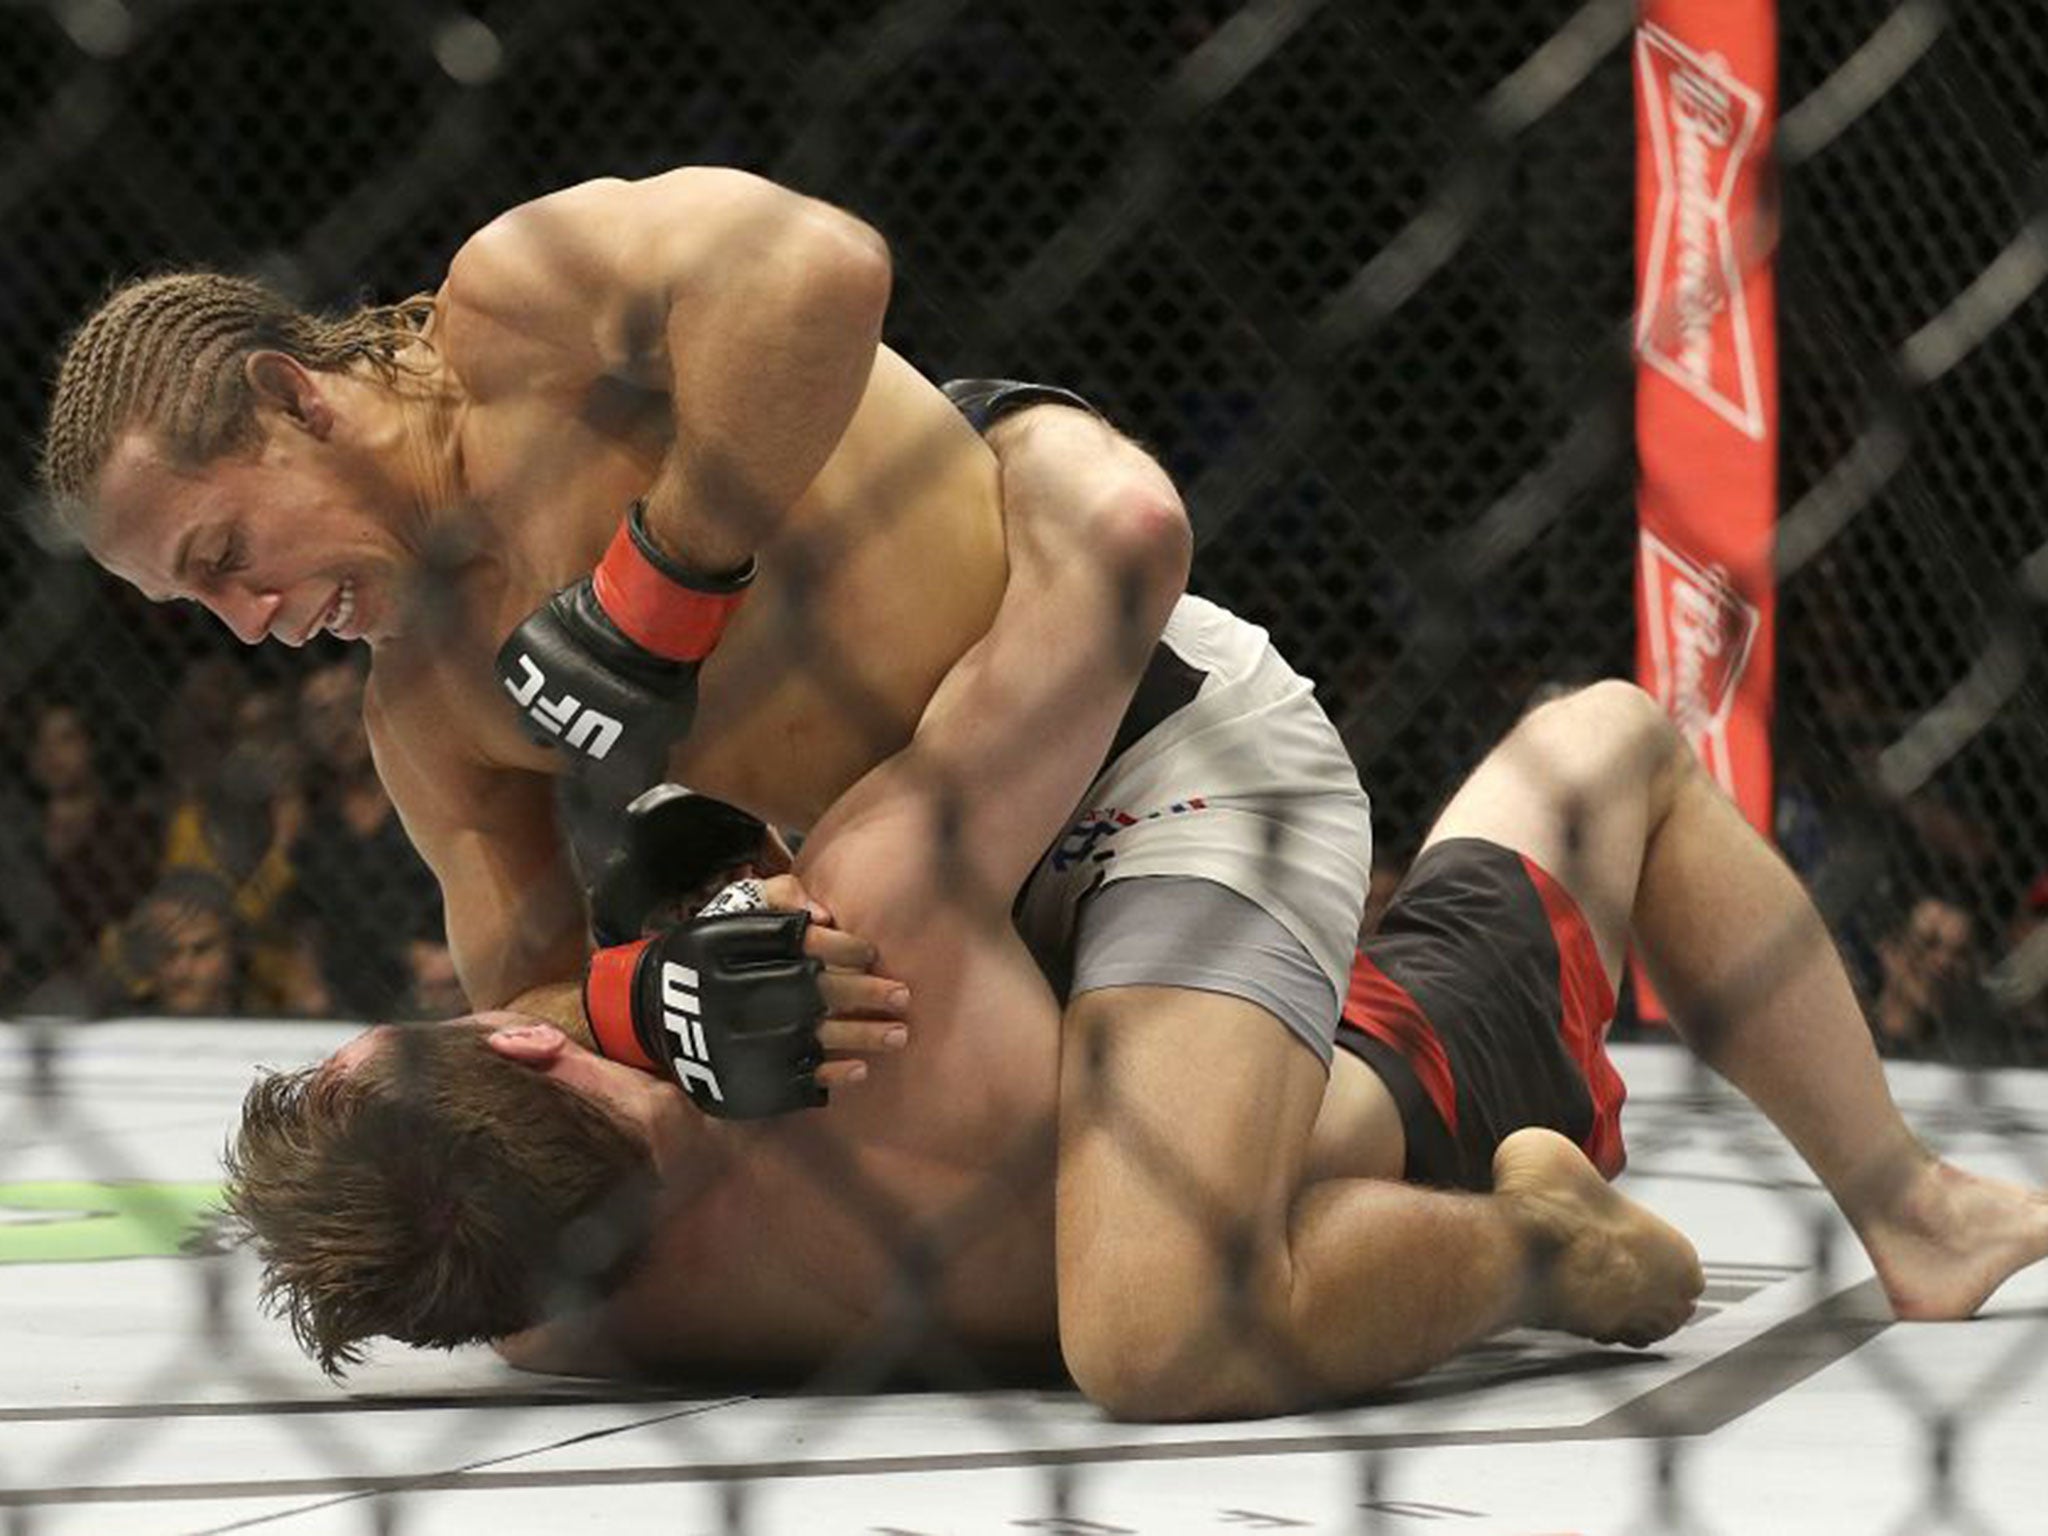 Urijah Faber ended his UFC career on a high as he defeated Brad Pickett